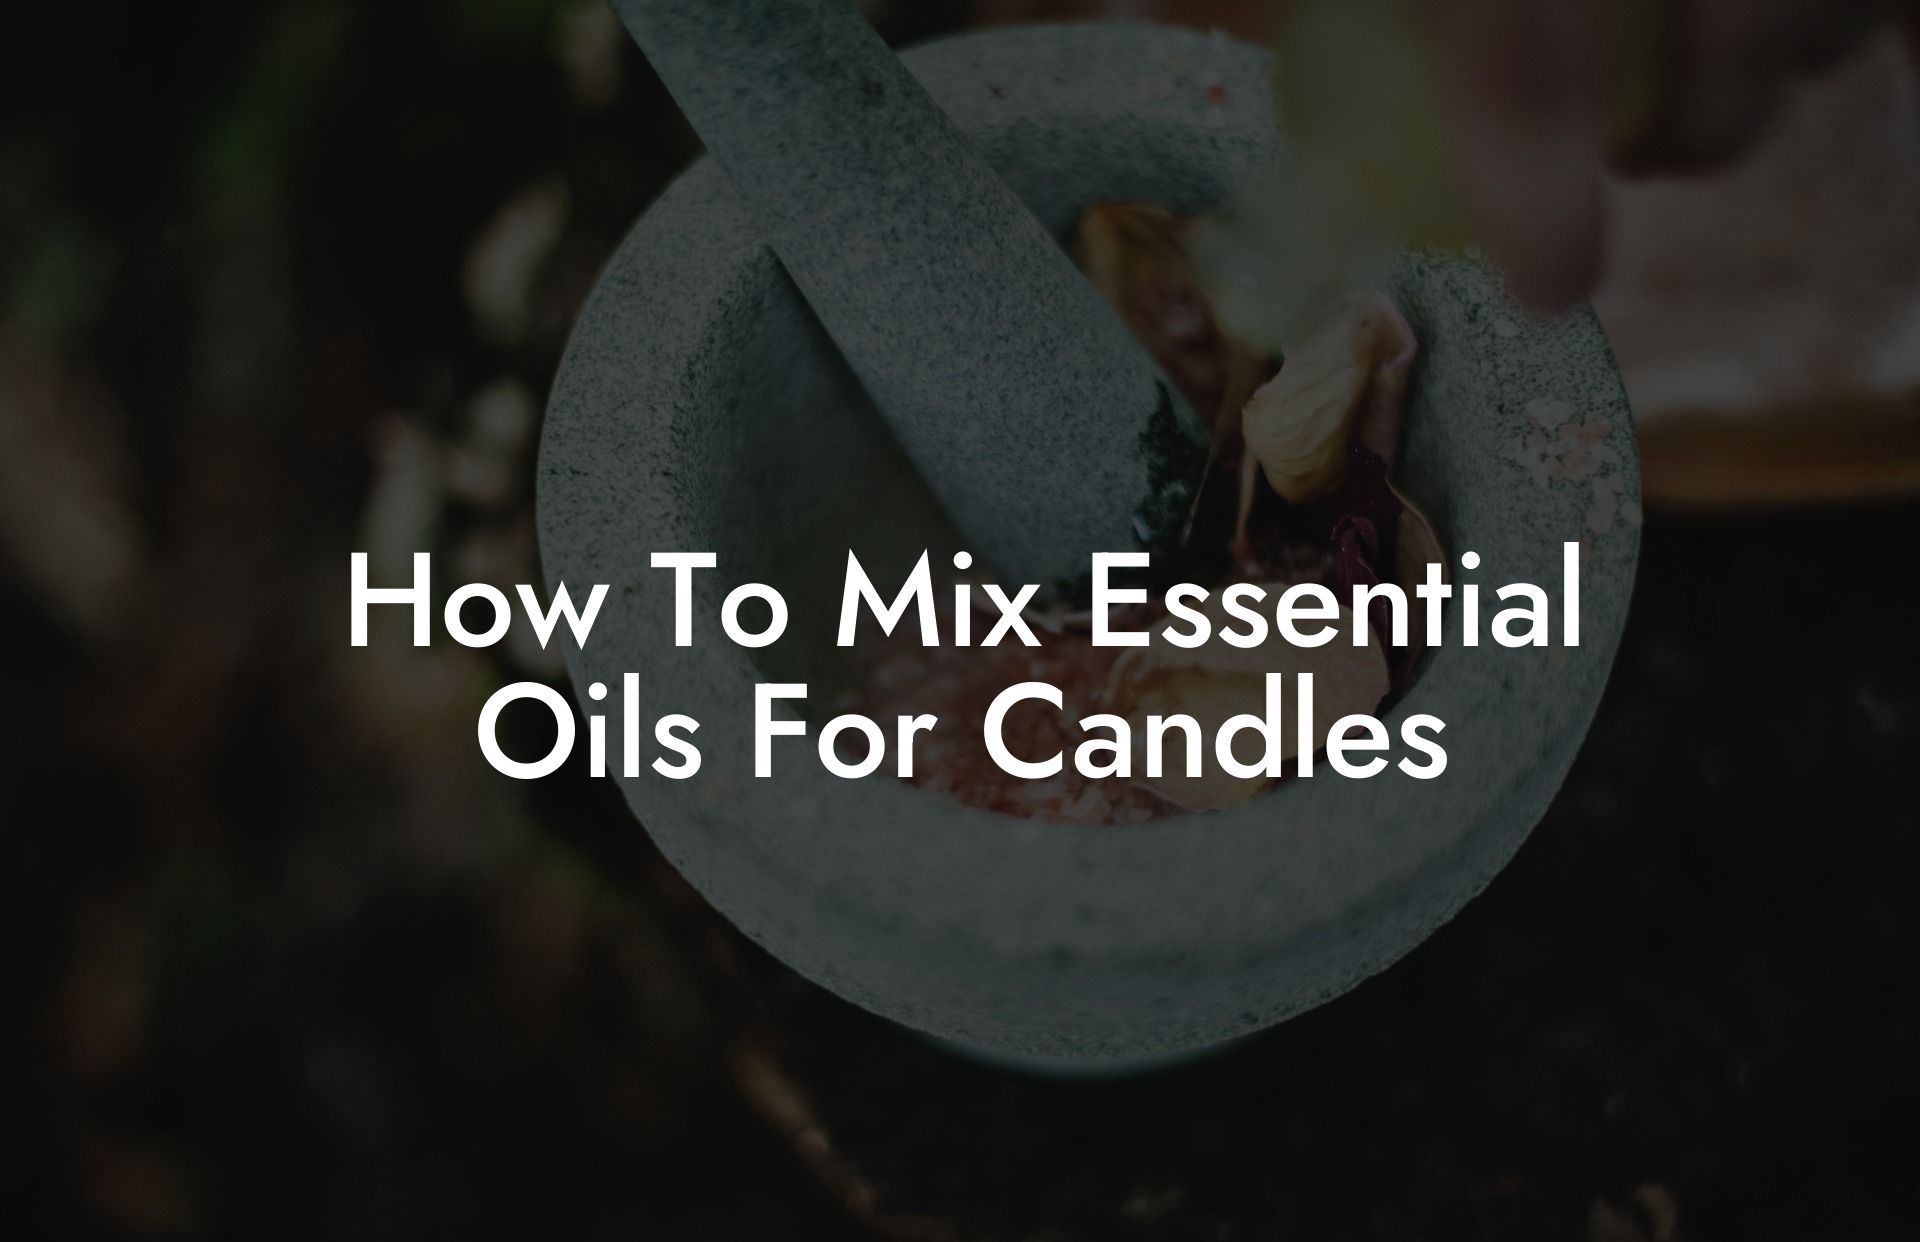 How To Mix Essential Oils For Candles